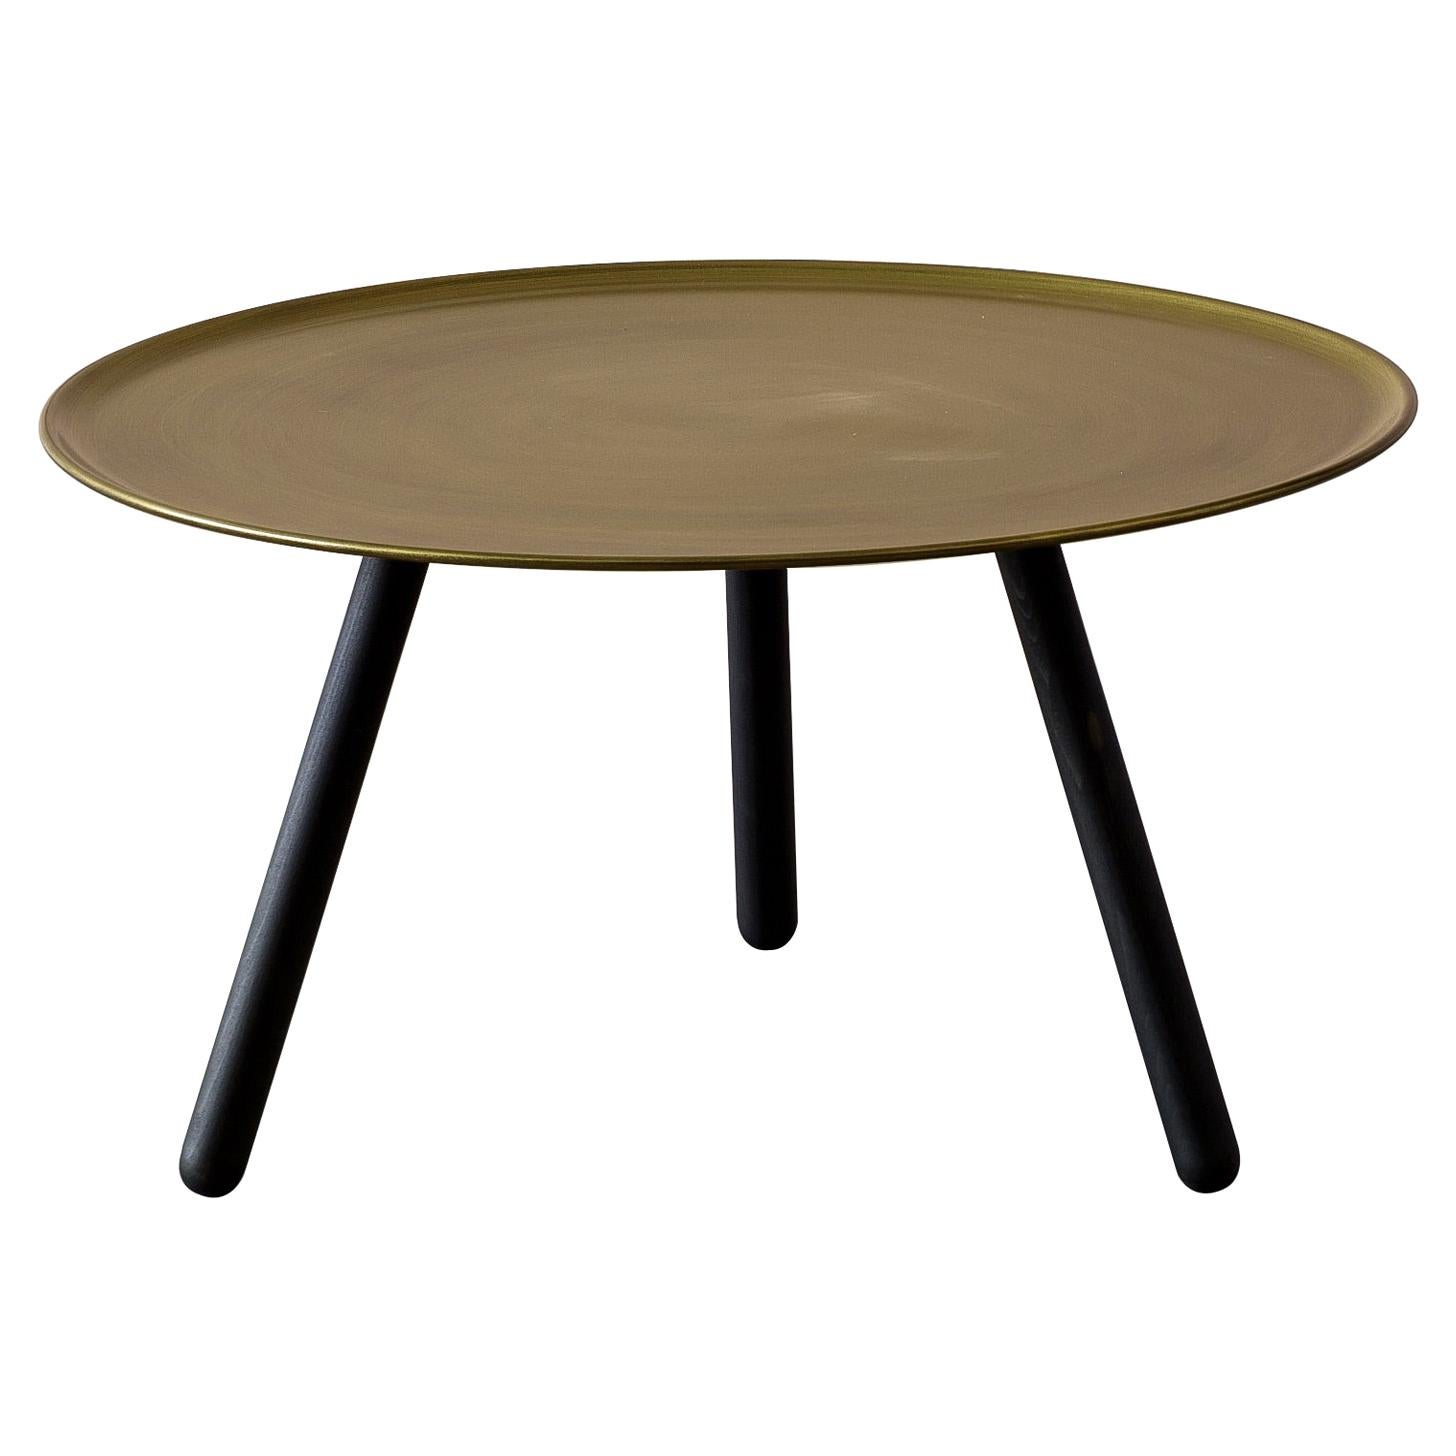 Pinocchio Low Coffee Table in Black Aniline Base, by Giopato & Coombes